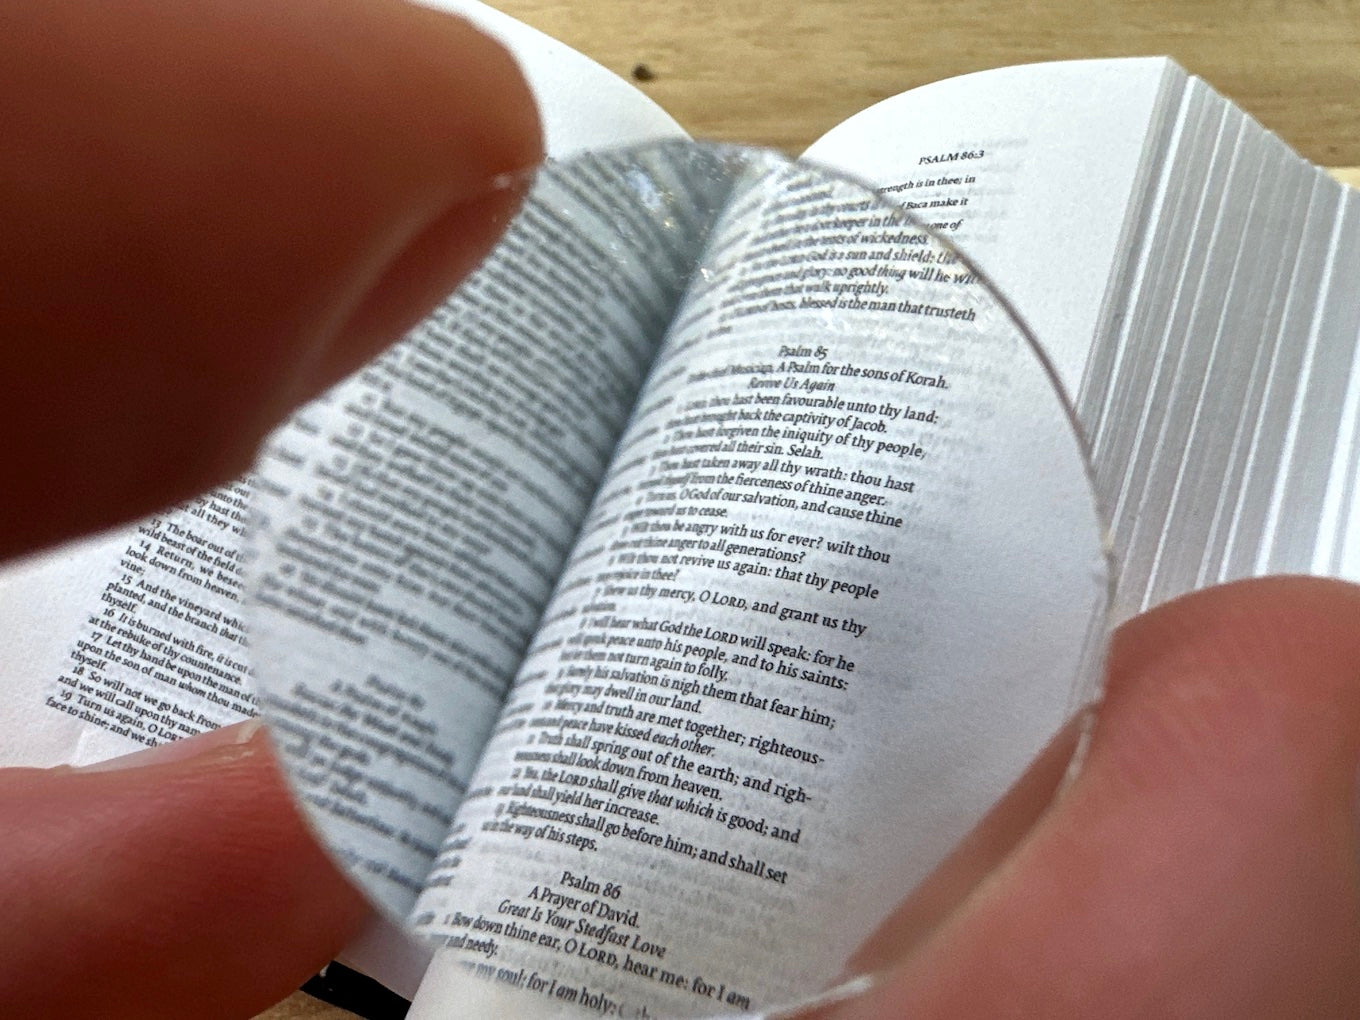 The magnifying glass lens that comes with Tiny Bible